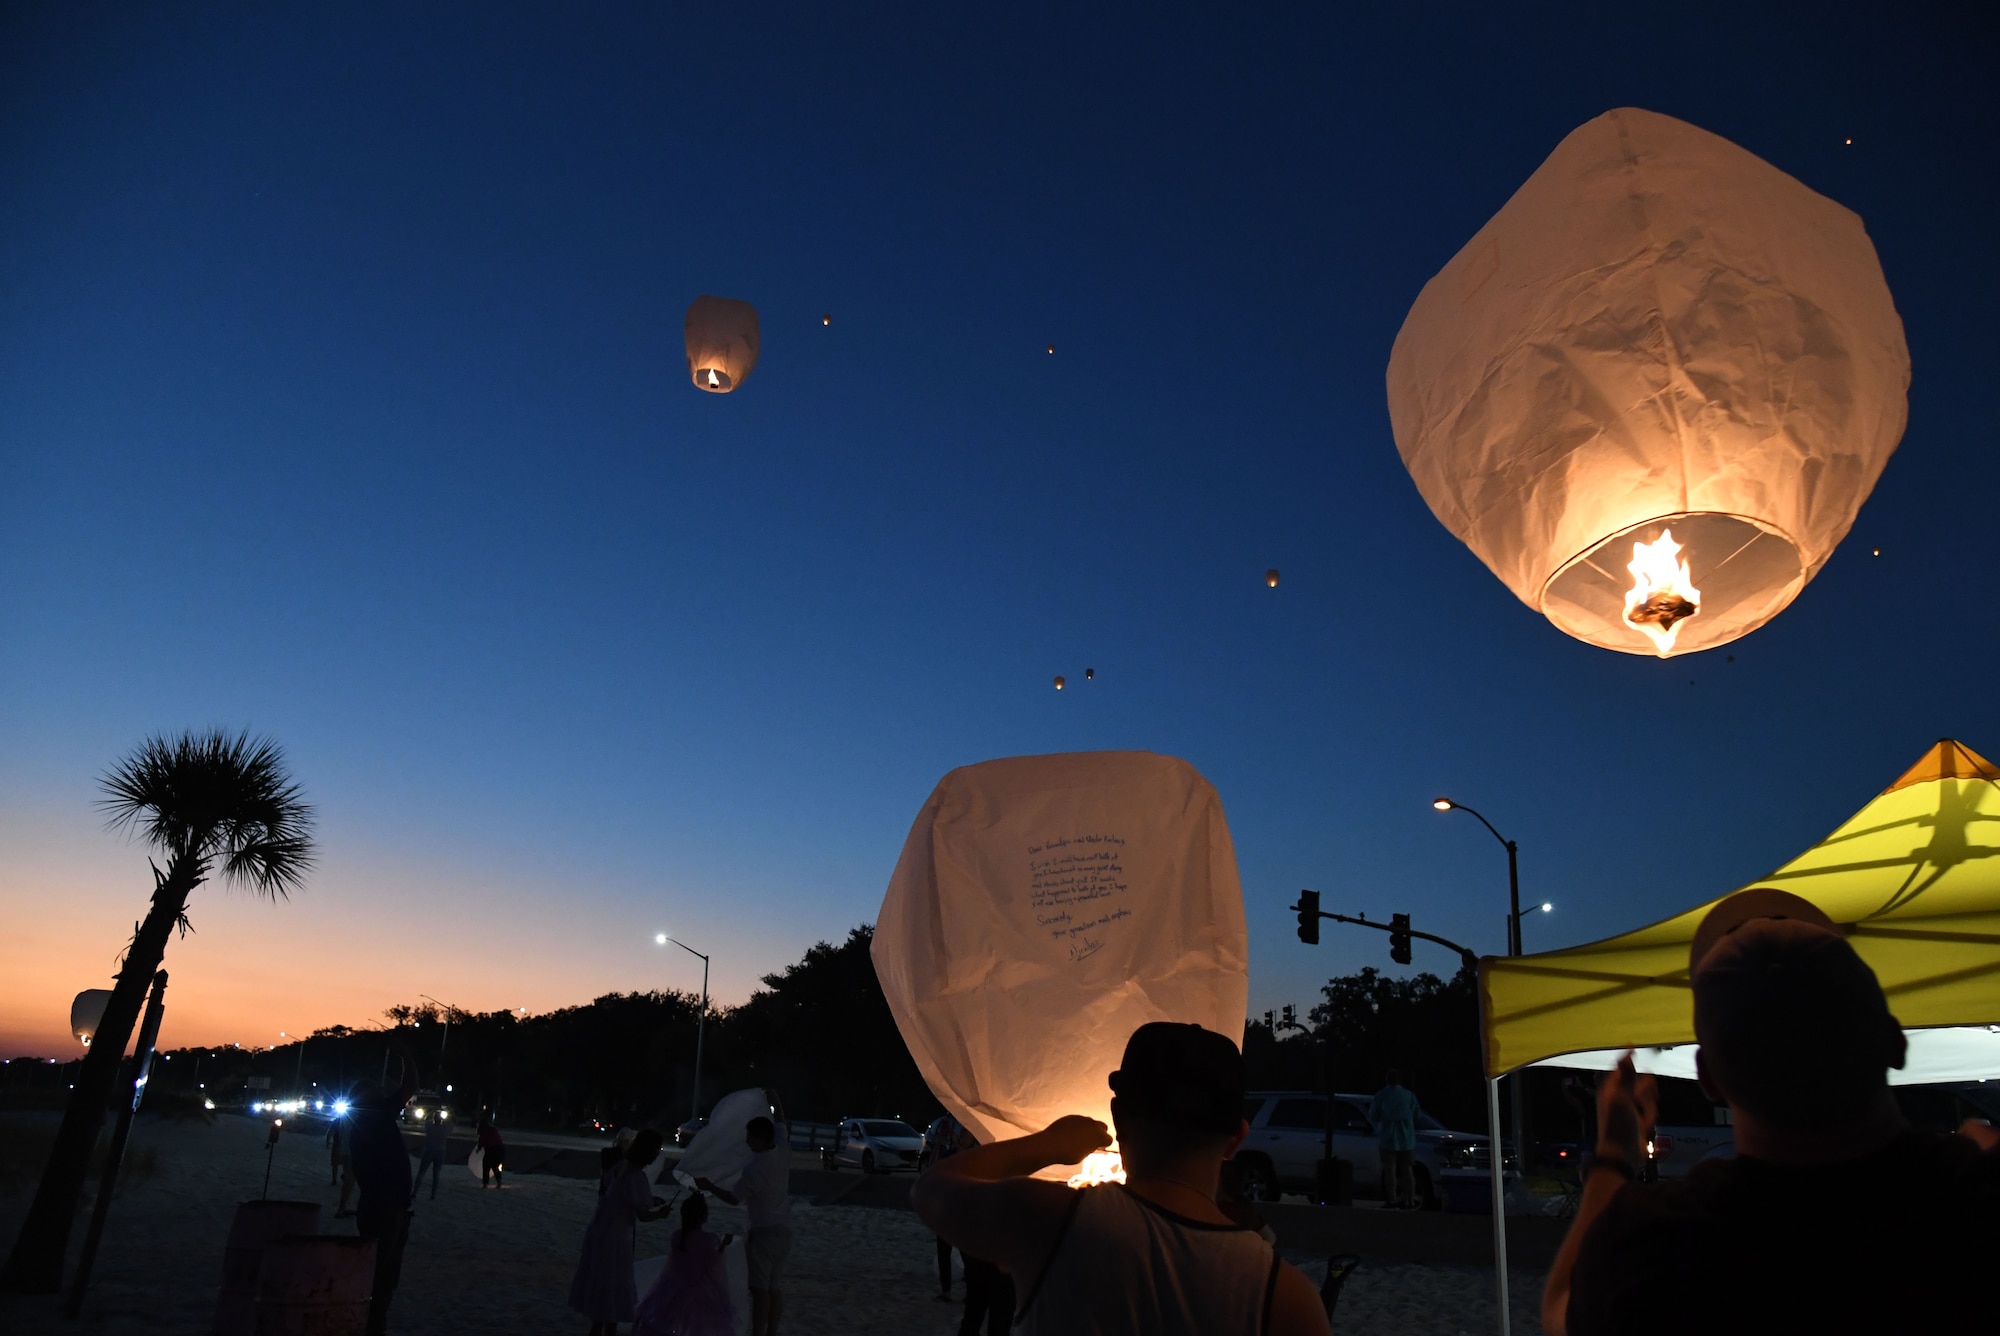 Military family members light and release lanterns during the Gold Star Families Sky Lantern Release on the Biloxi Beach, Mississippi, Sept. 23, 2022. The event, hosted by Keesler Air Force Base, included eco-friendly sky lanterns released in honor of fallen heroes. (U.S. Air Force photo by Kemberly Groue)